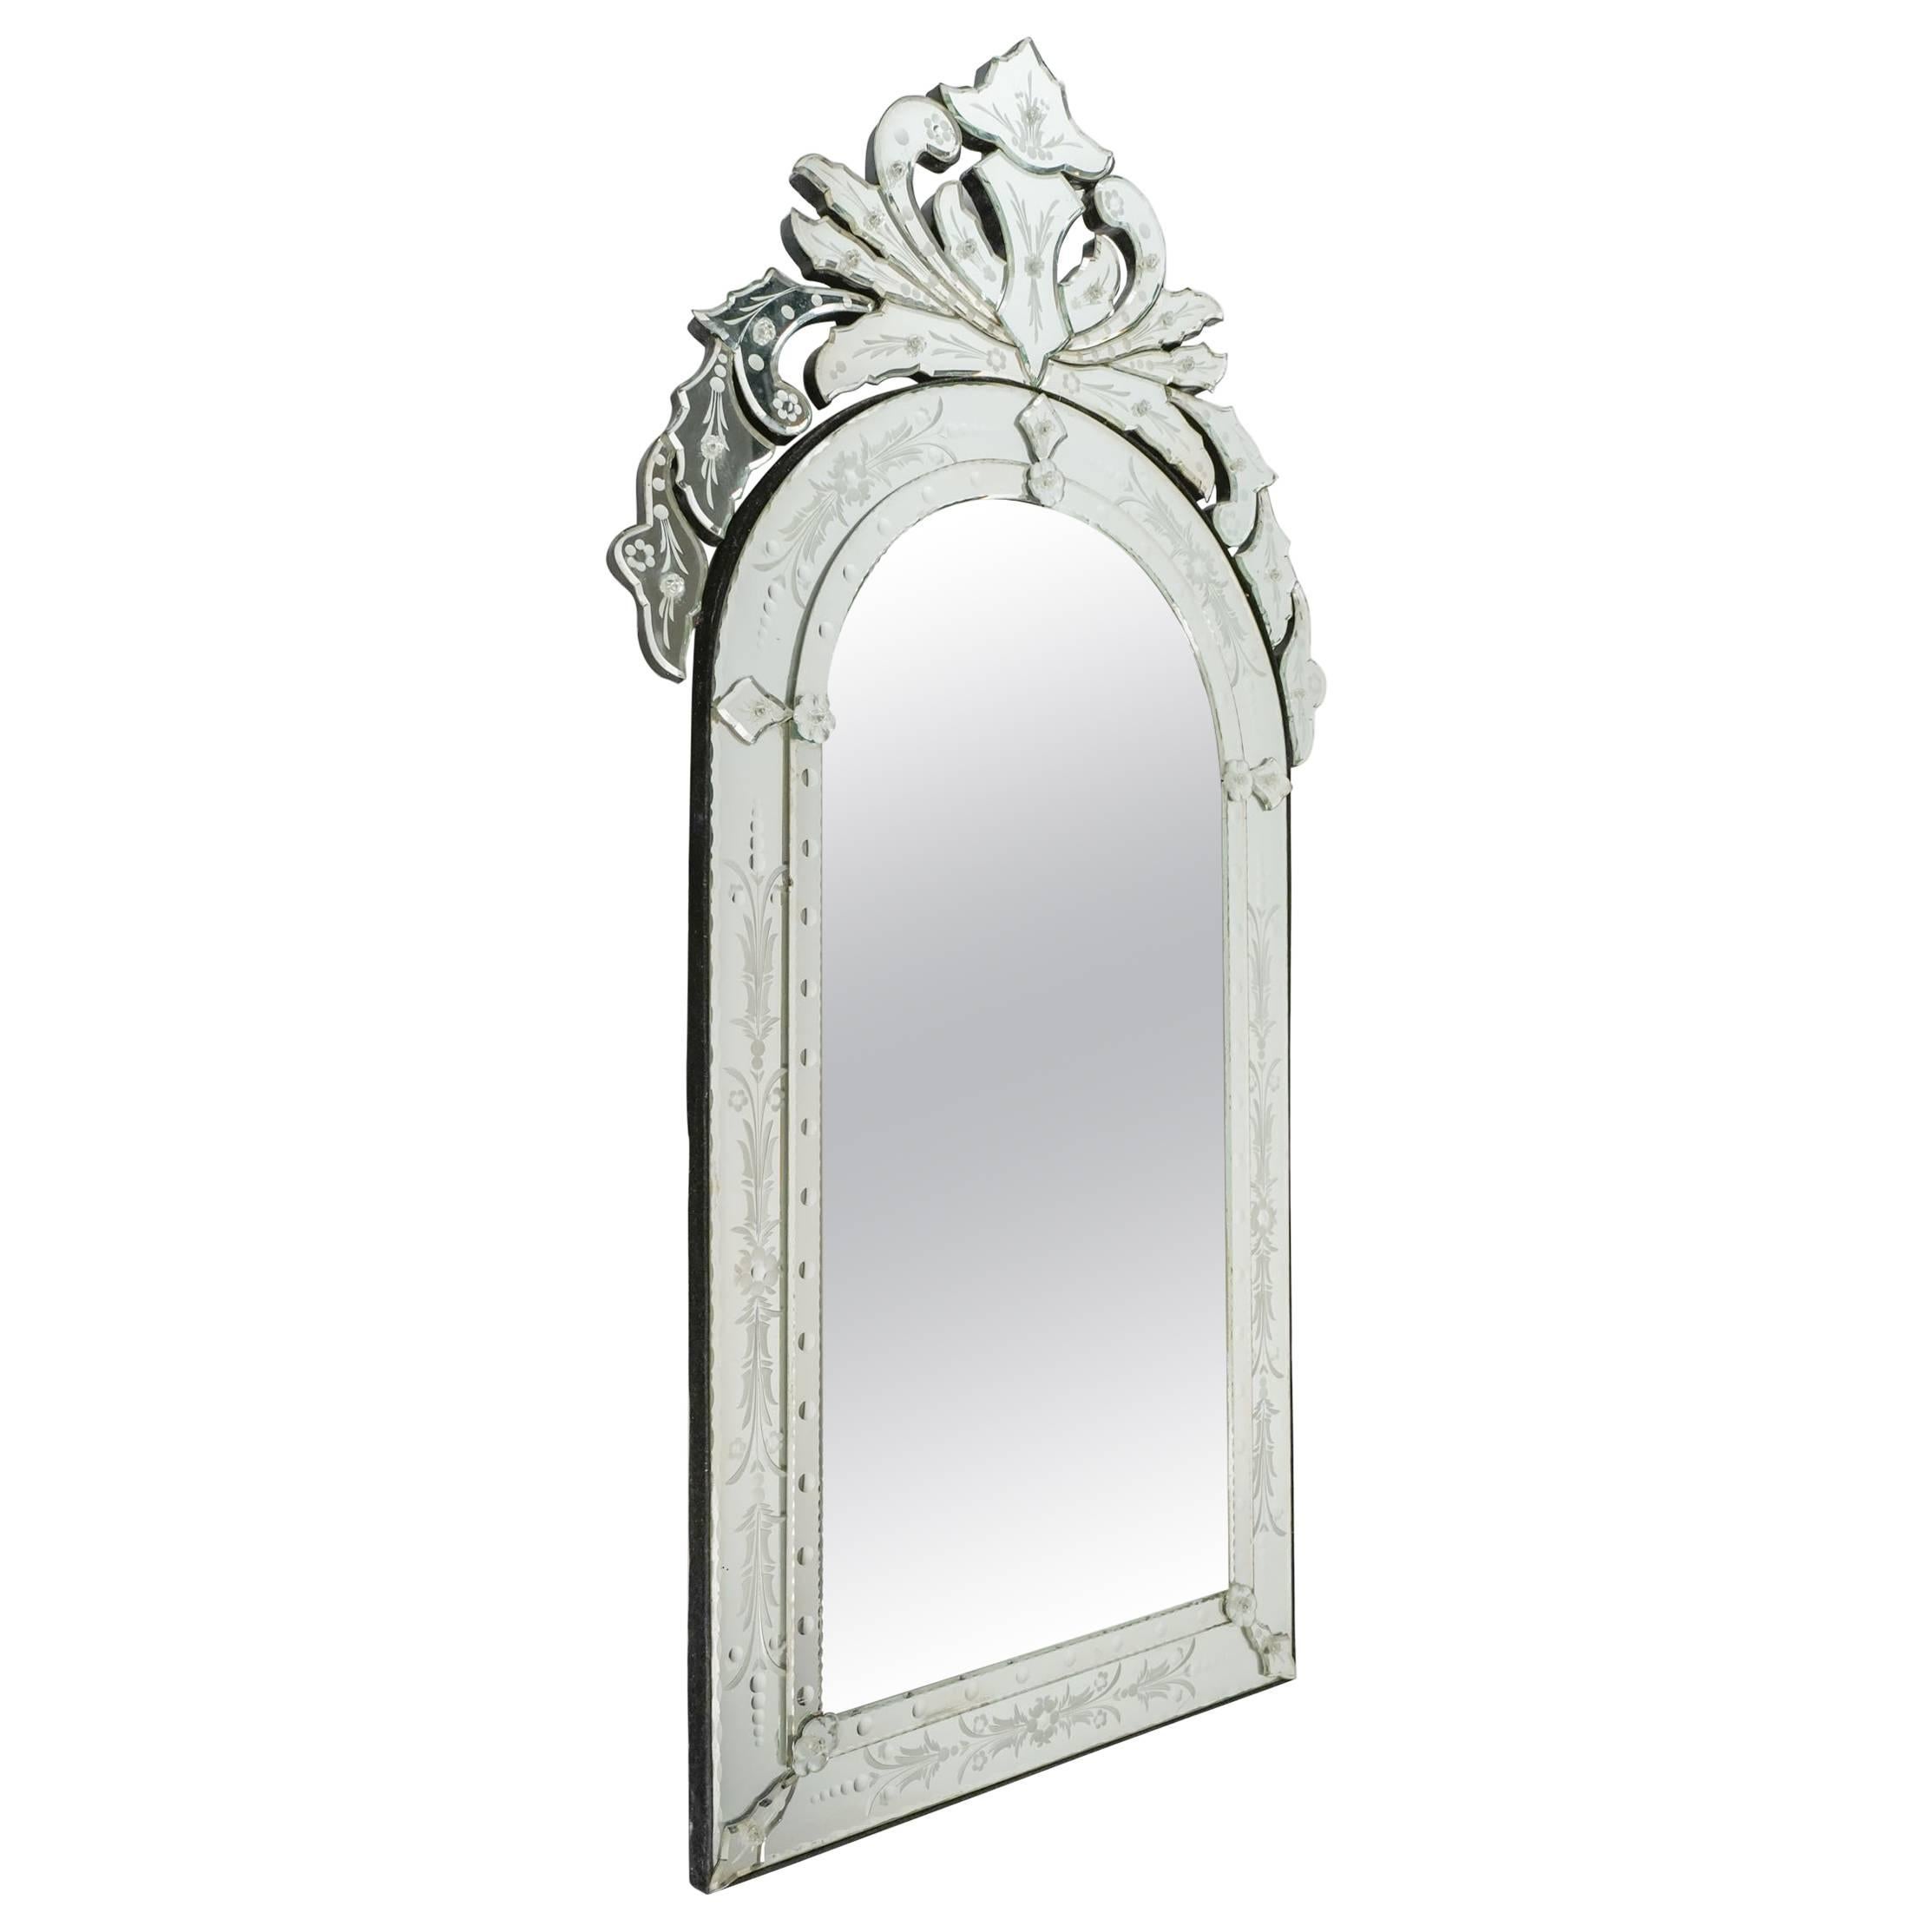 Venetian Mirror of the 20th century. Glass is etched and bevelled.